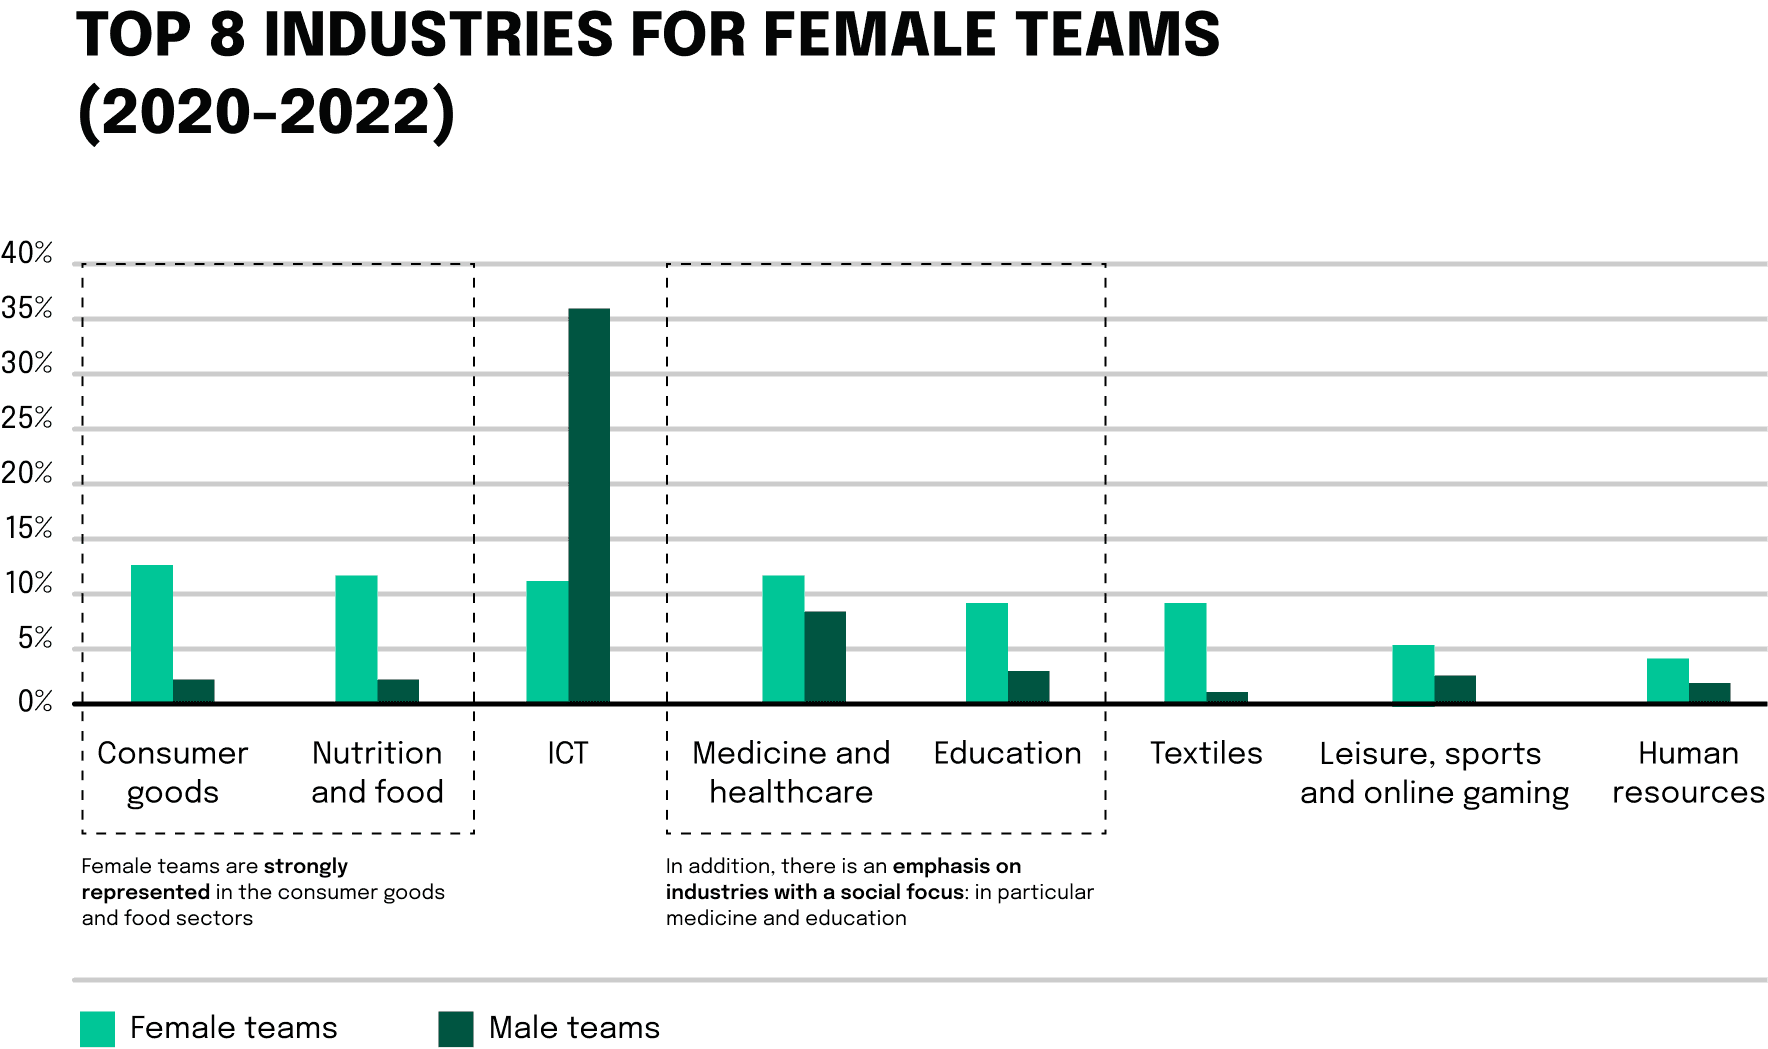 Significant differences become visible in the gender gap in the various industries. If we delve deeper into the technology sector, the gender gap becomes even clearer. Here, male founding teams dominate and account for 35.8% of the companies founded. Women, on the other hand, contribute only 12.3%.